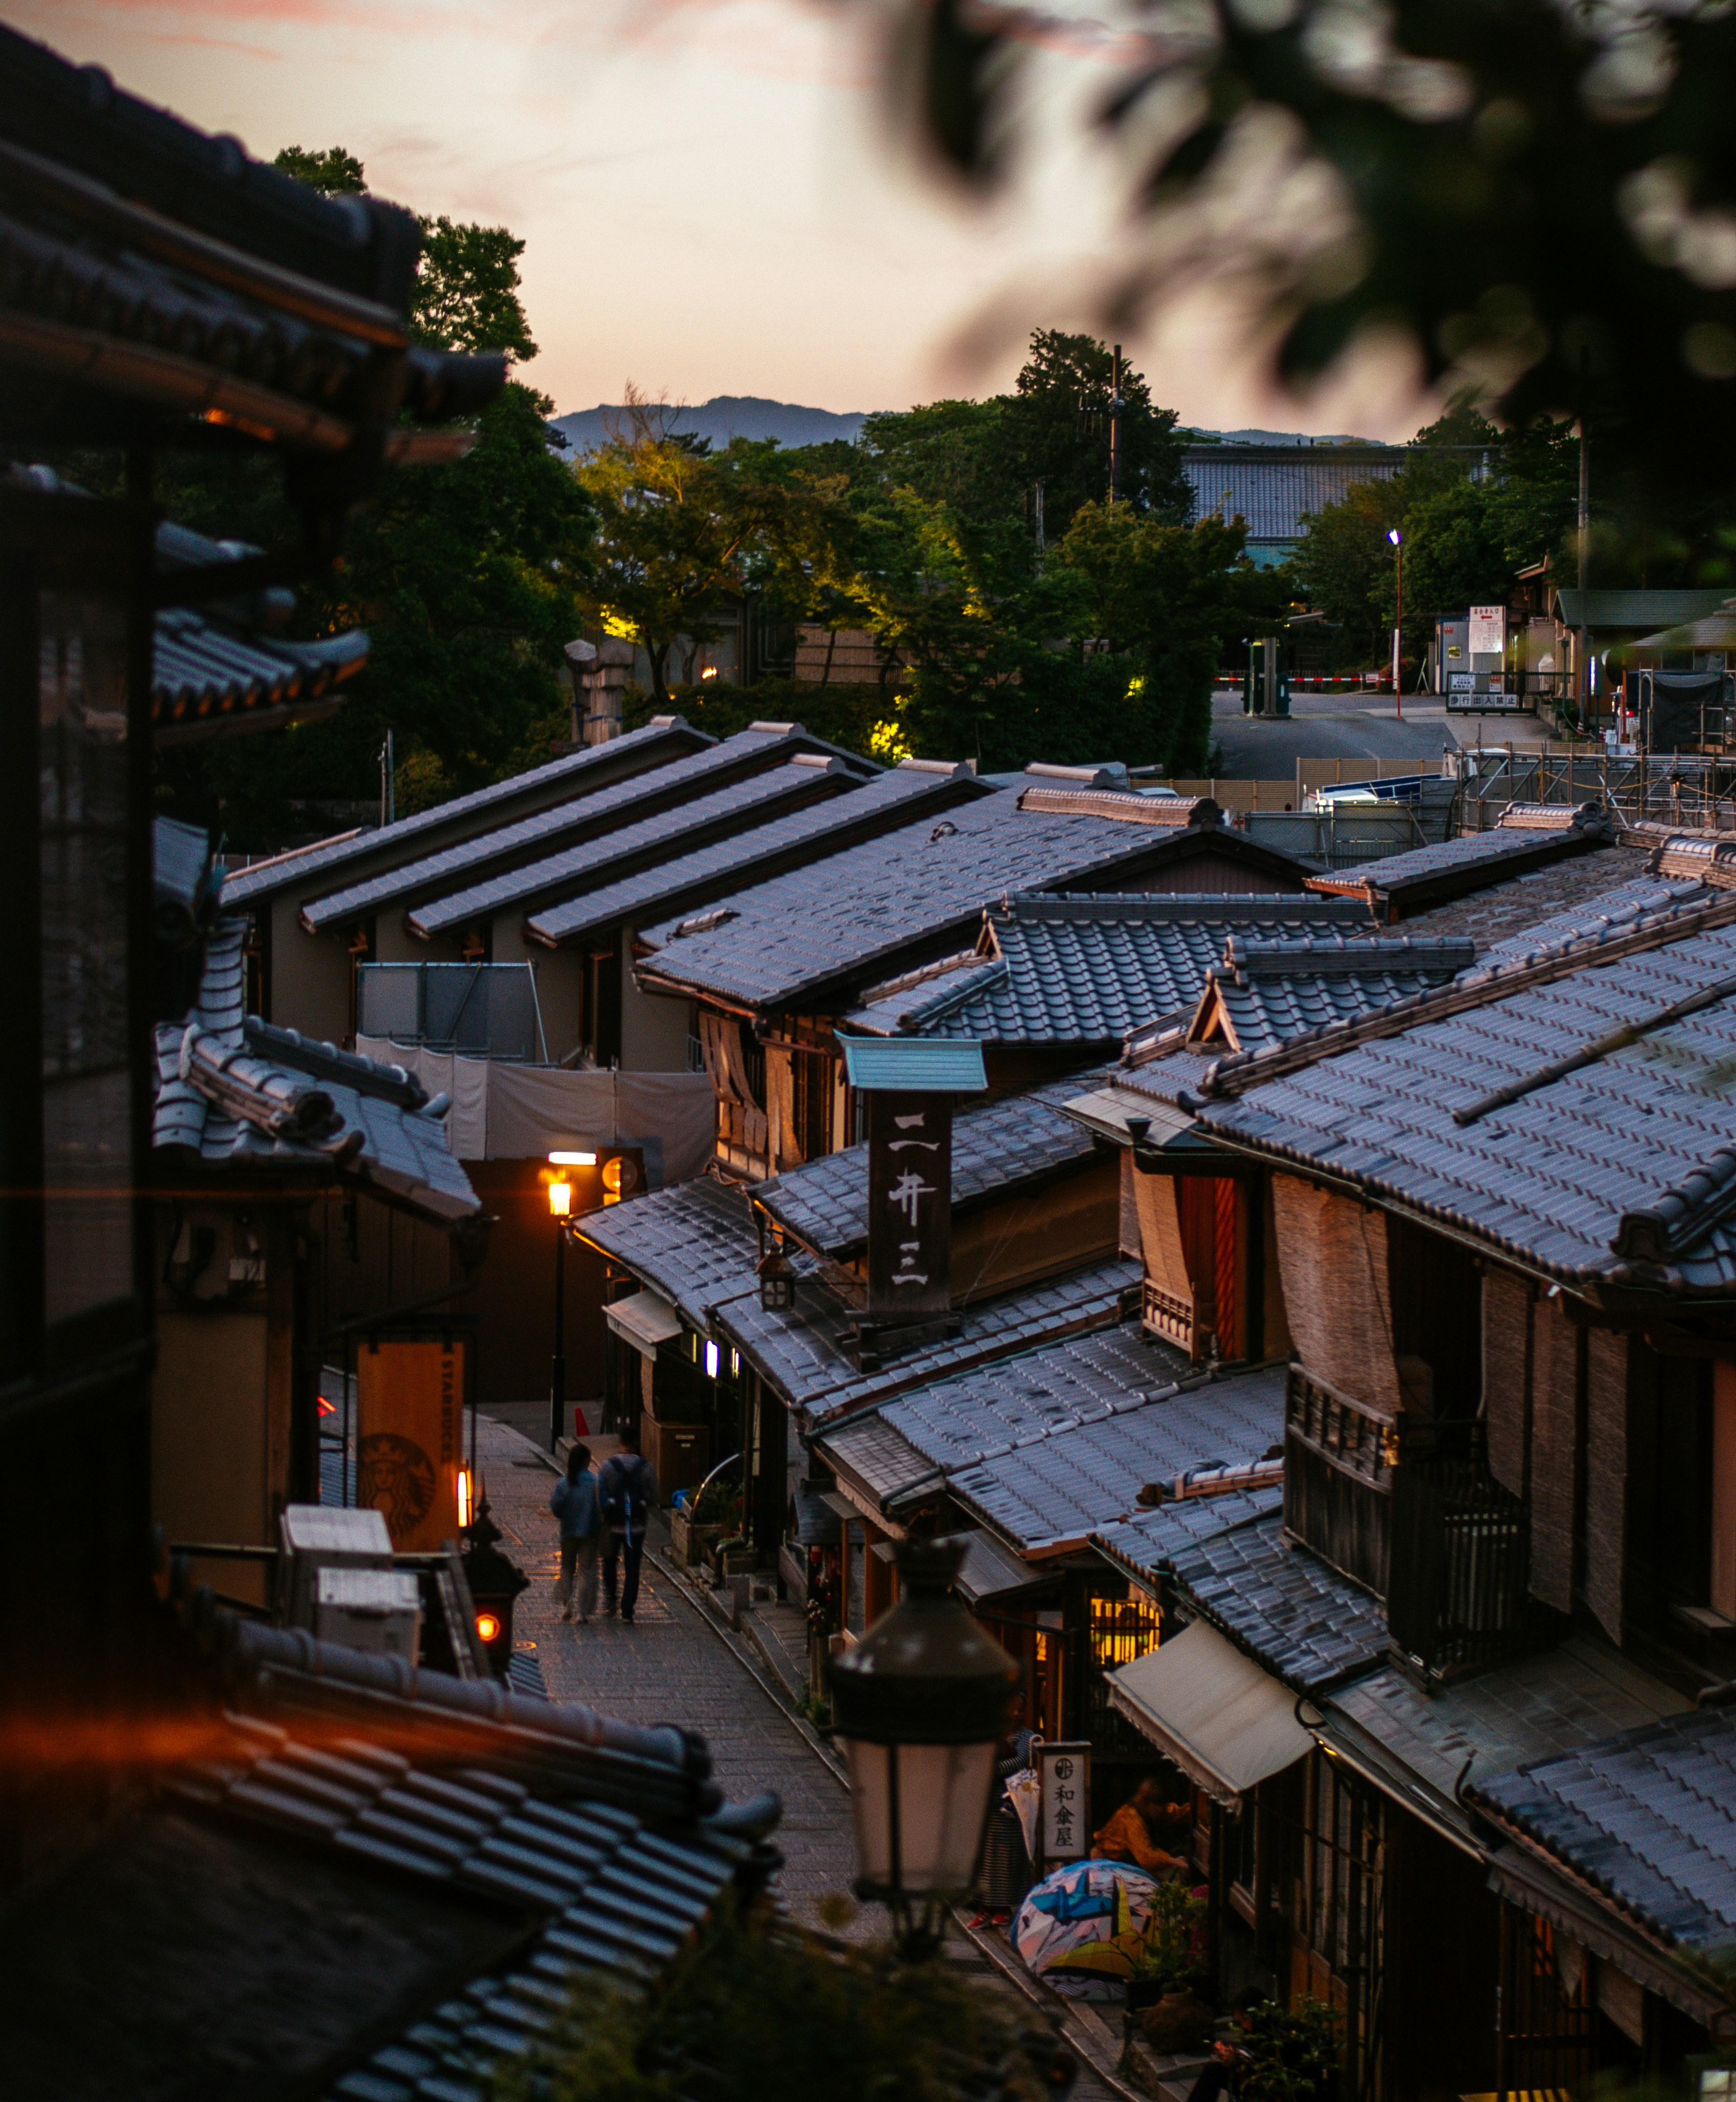 Sunset view of the streets in the Gion district from Kyoto highlighting the Japanese architecture.